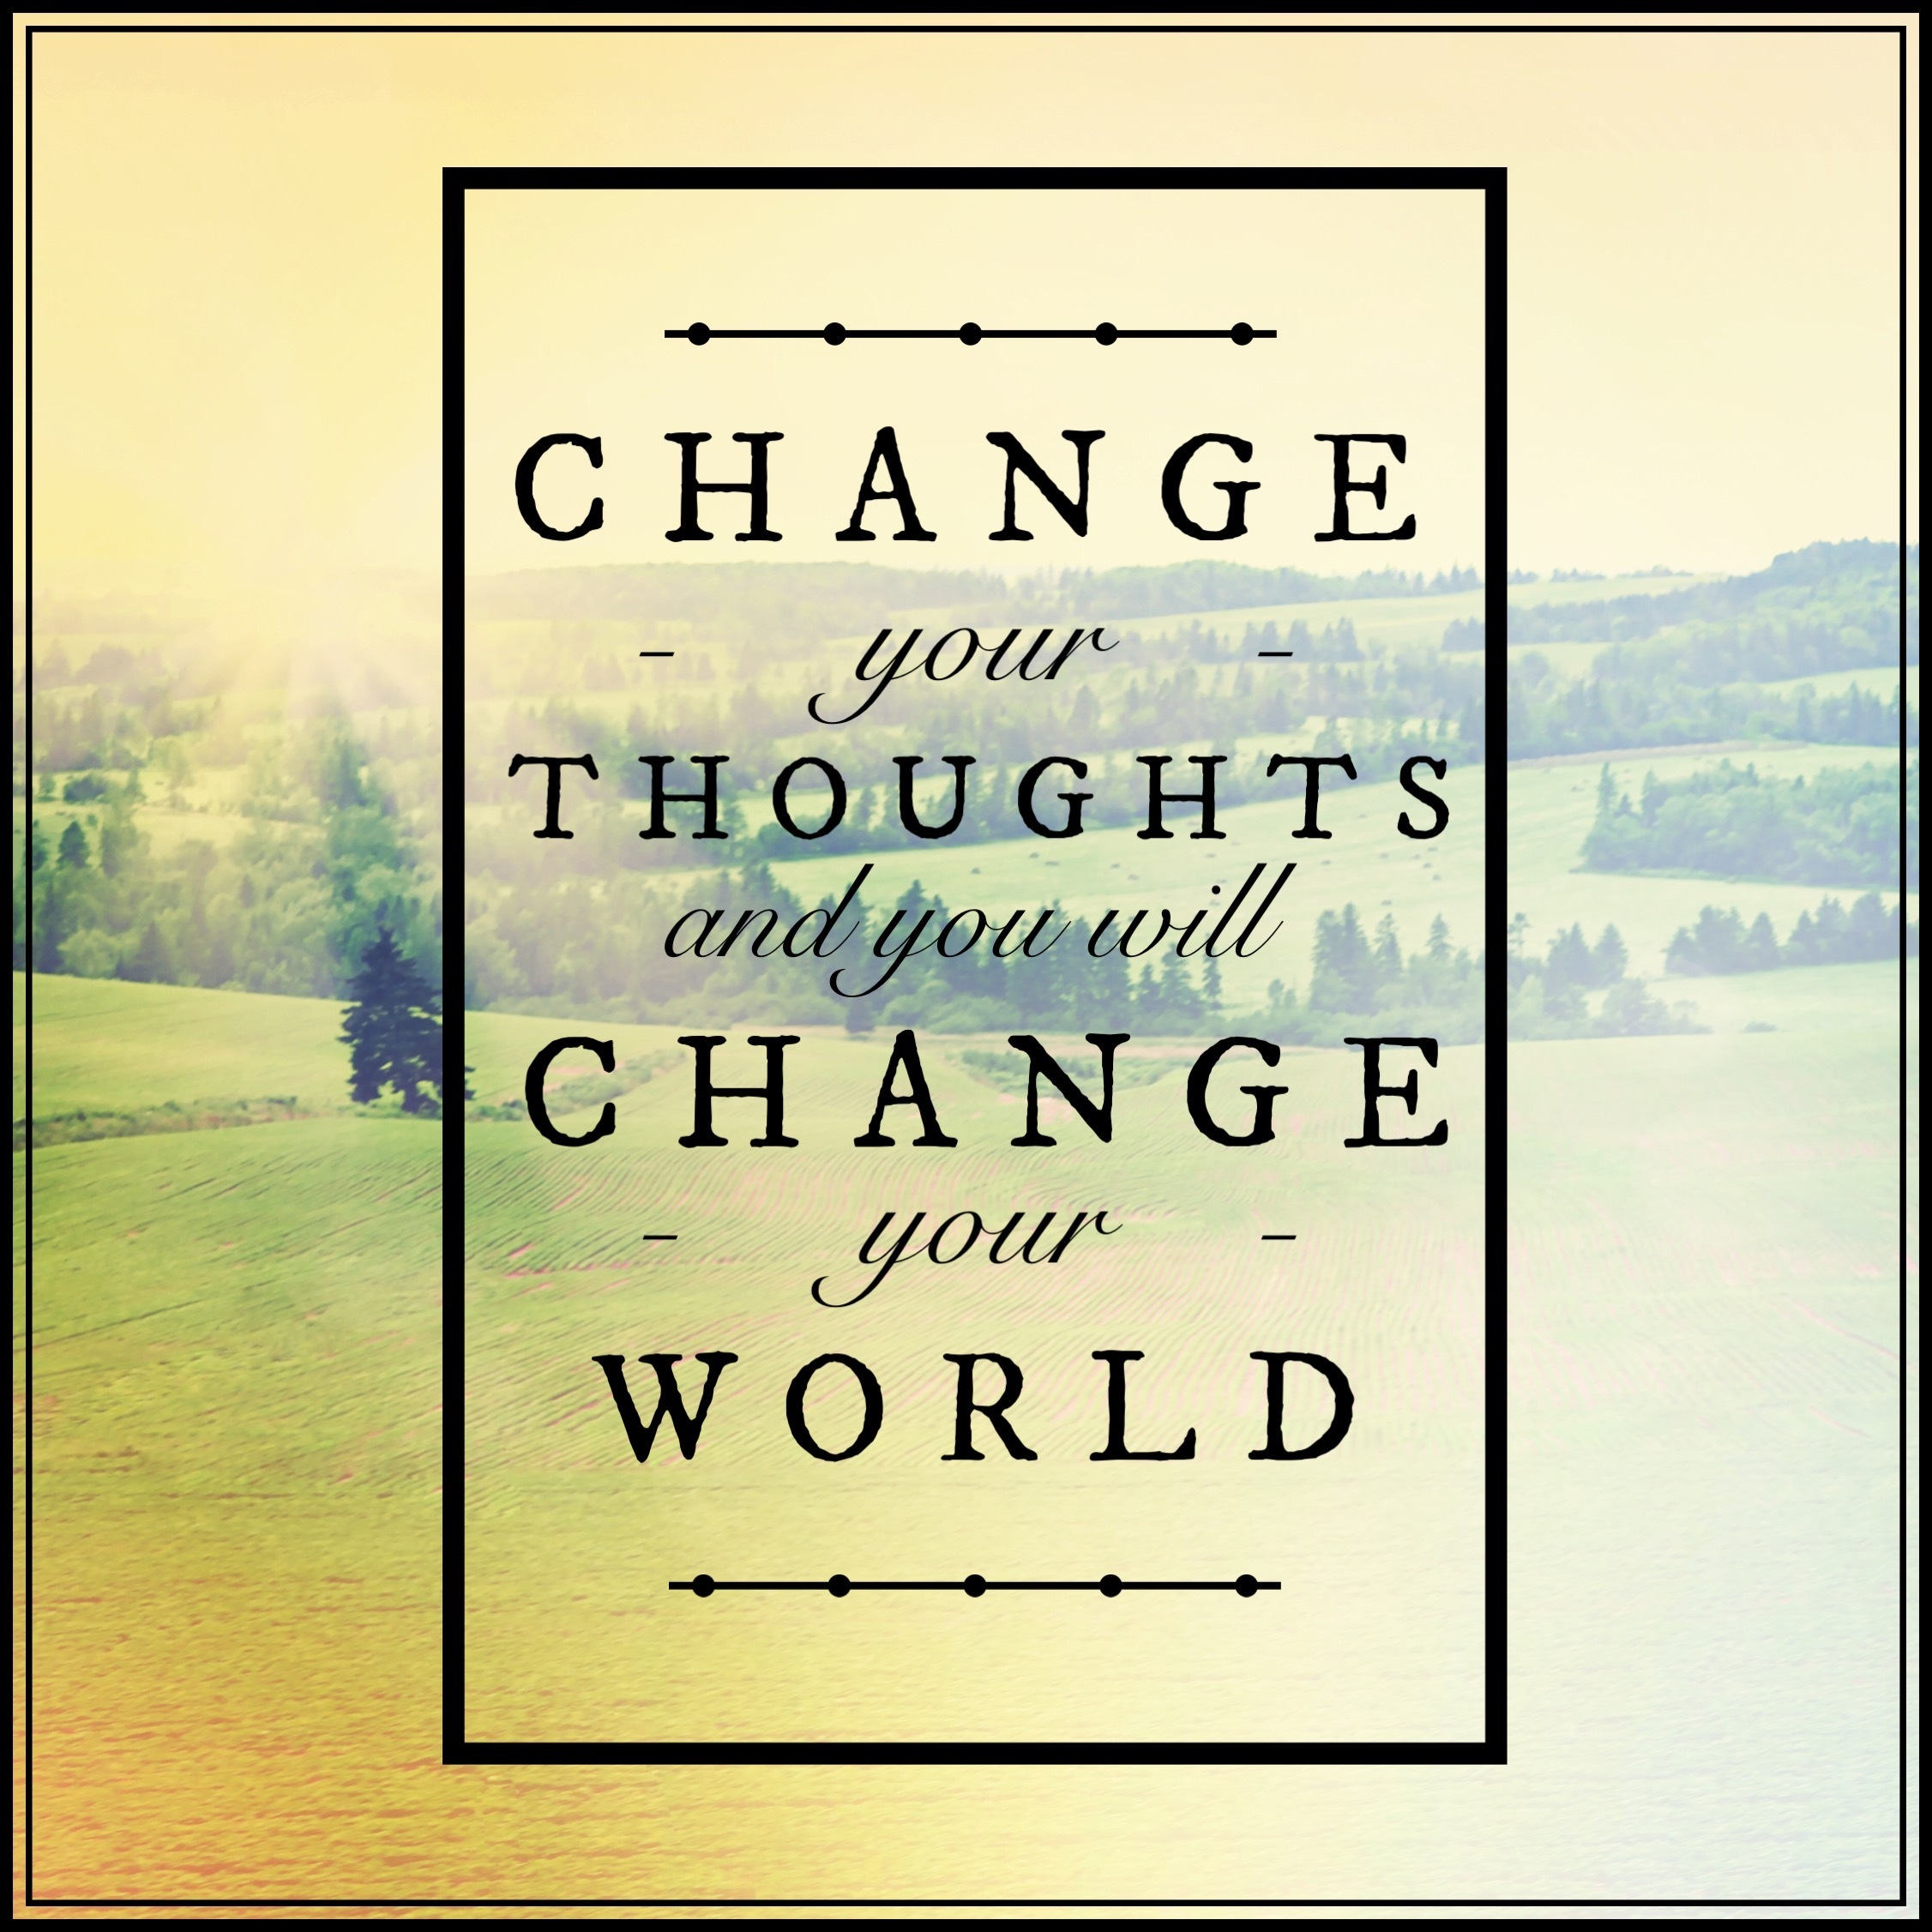 Change Your Thoughts Change Your World